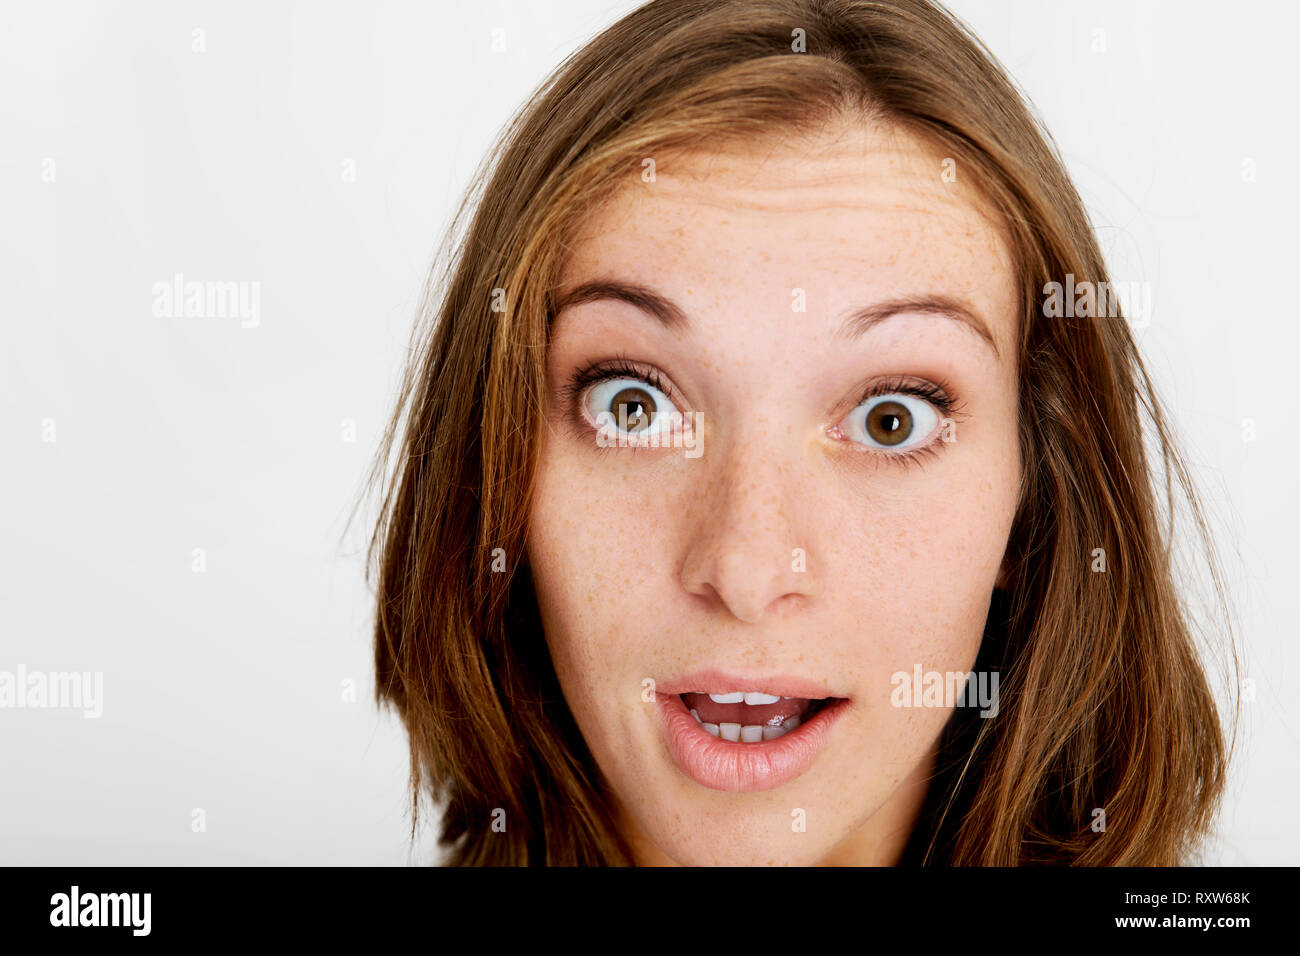 Shocked face of redhead woman on white background. Stock Photo